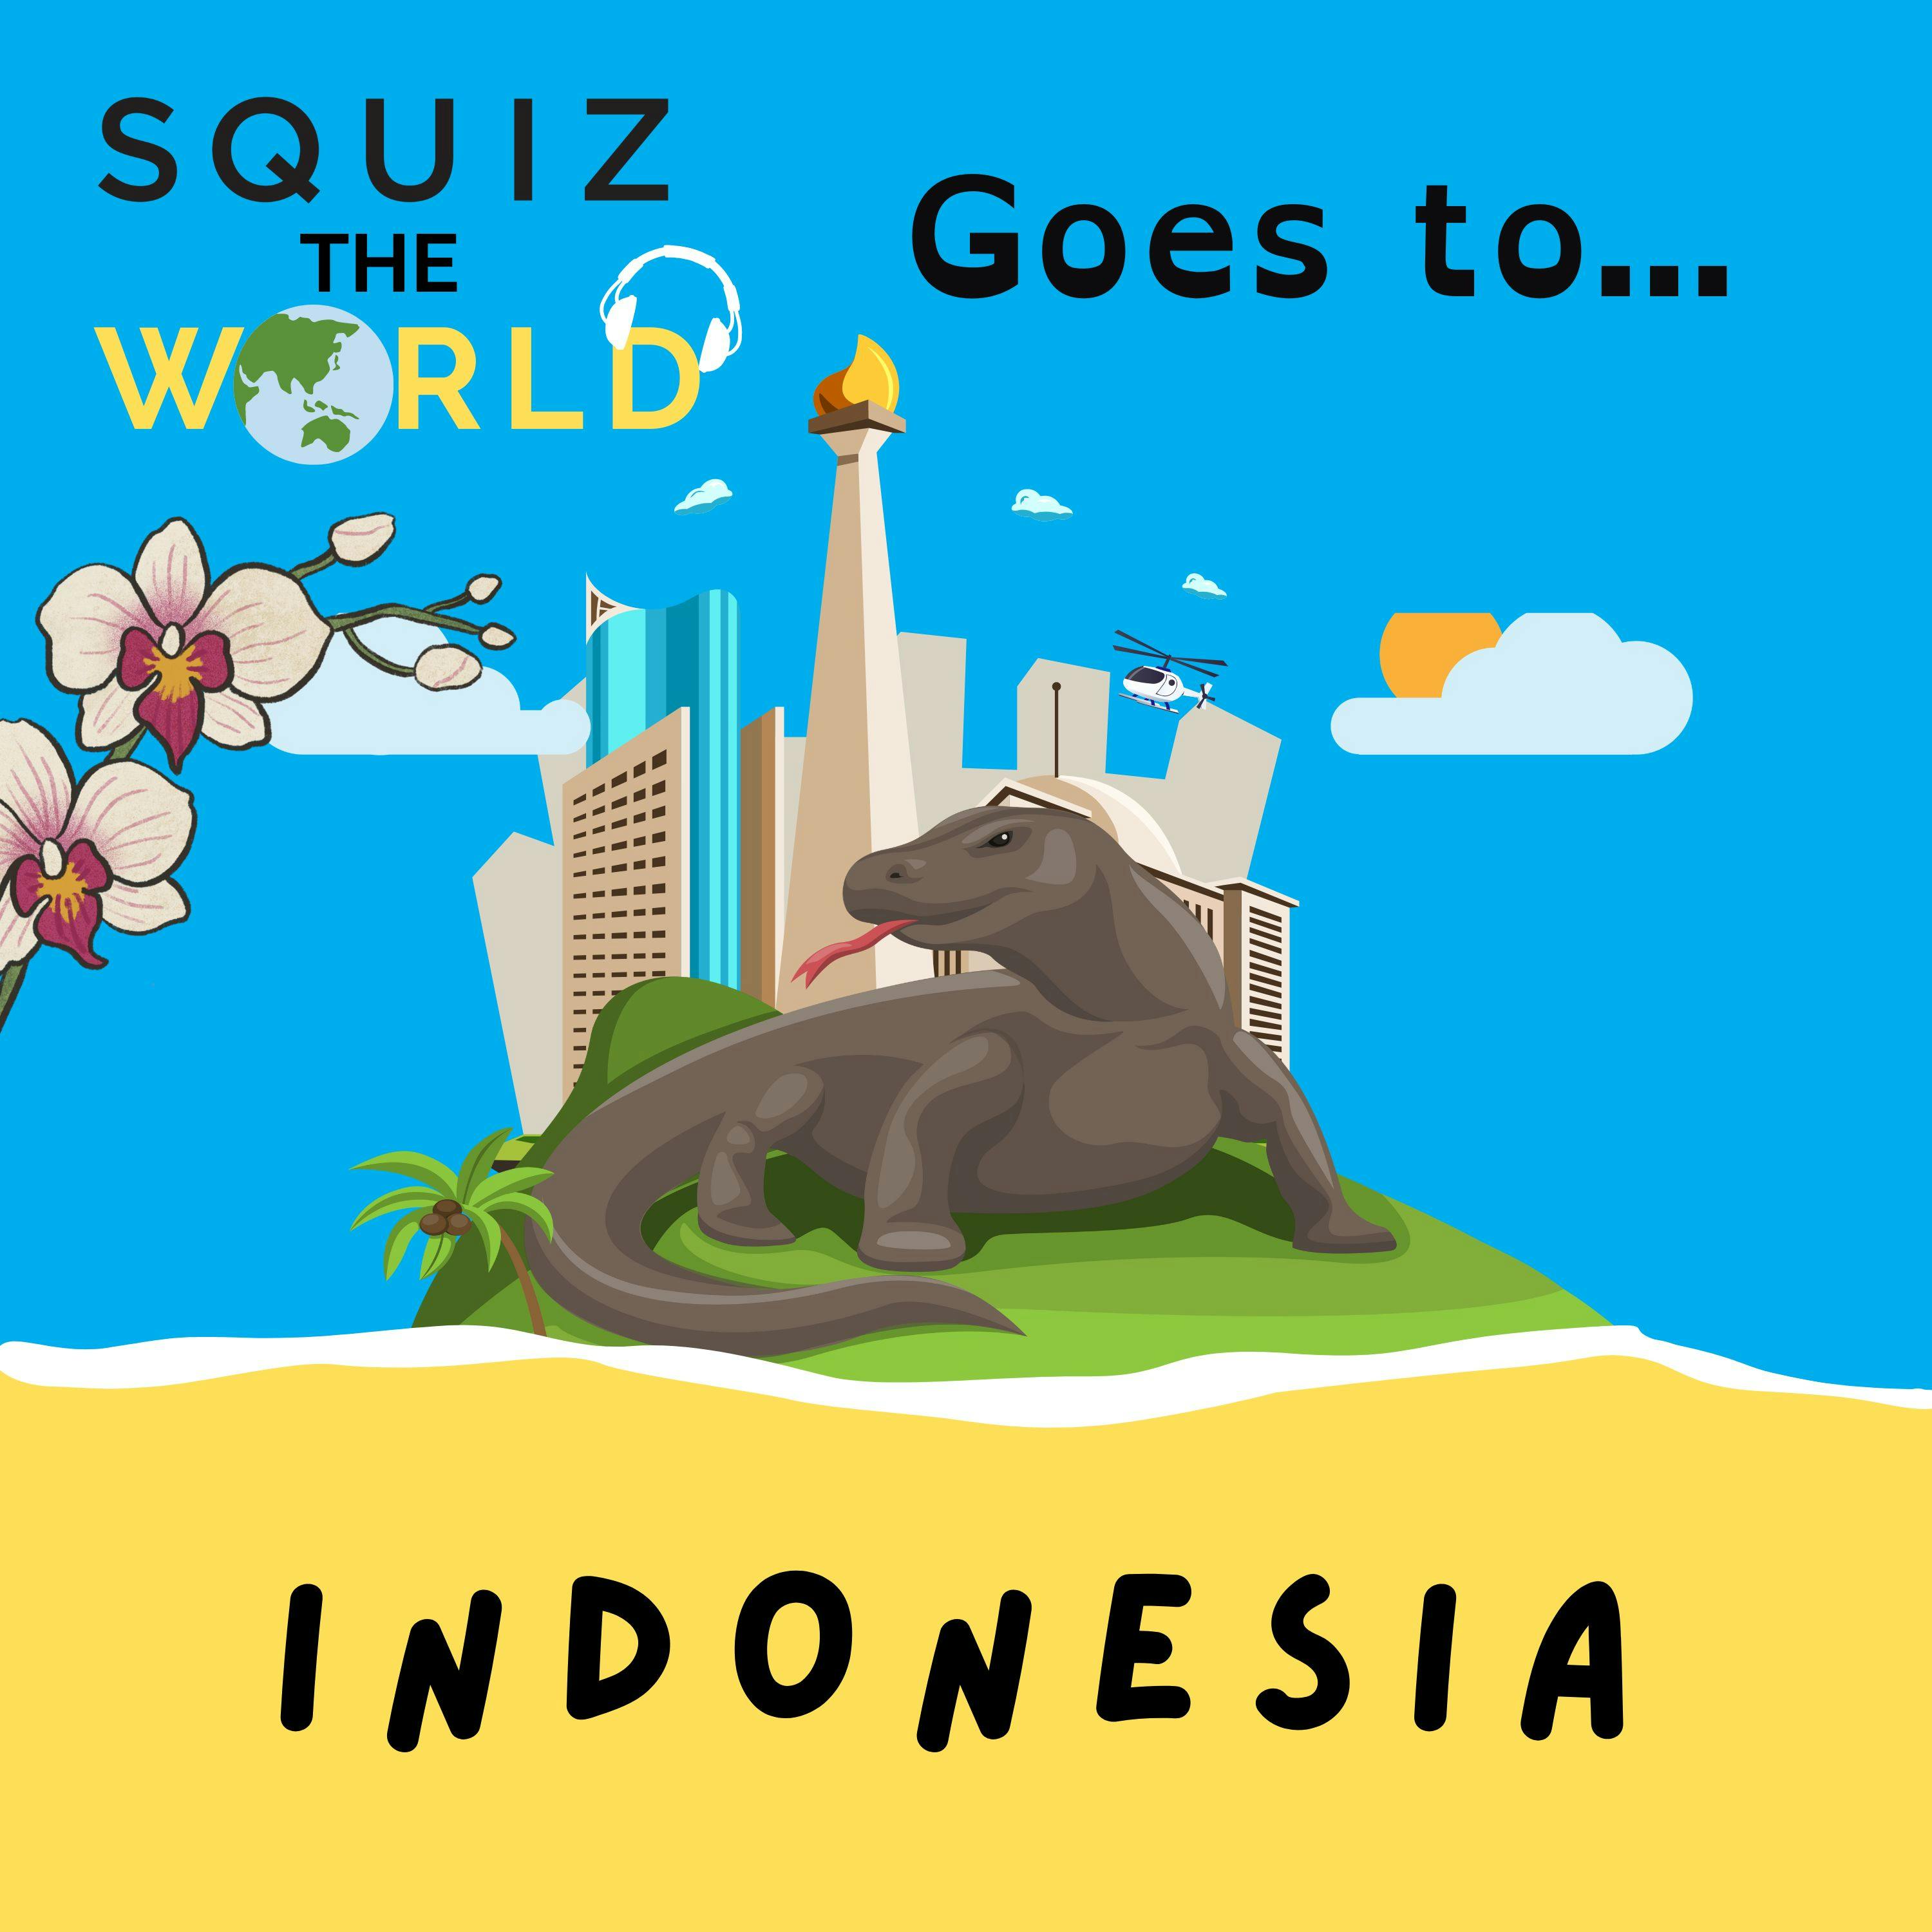 Squiz the World goes to... Indonesia